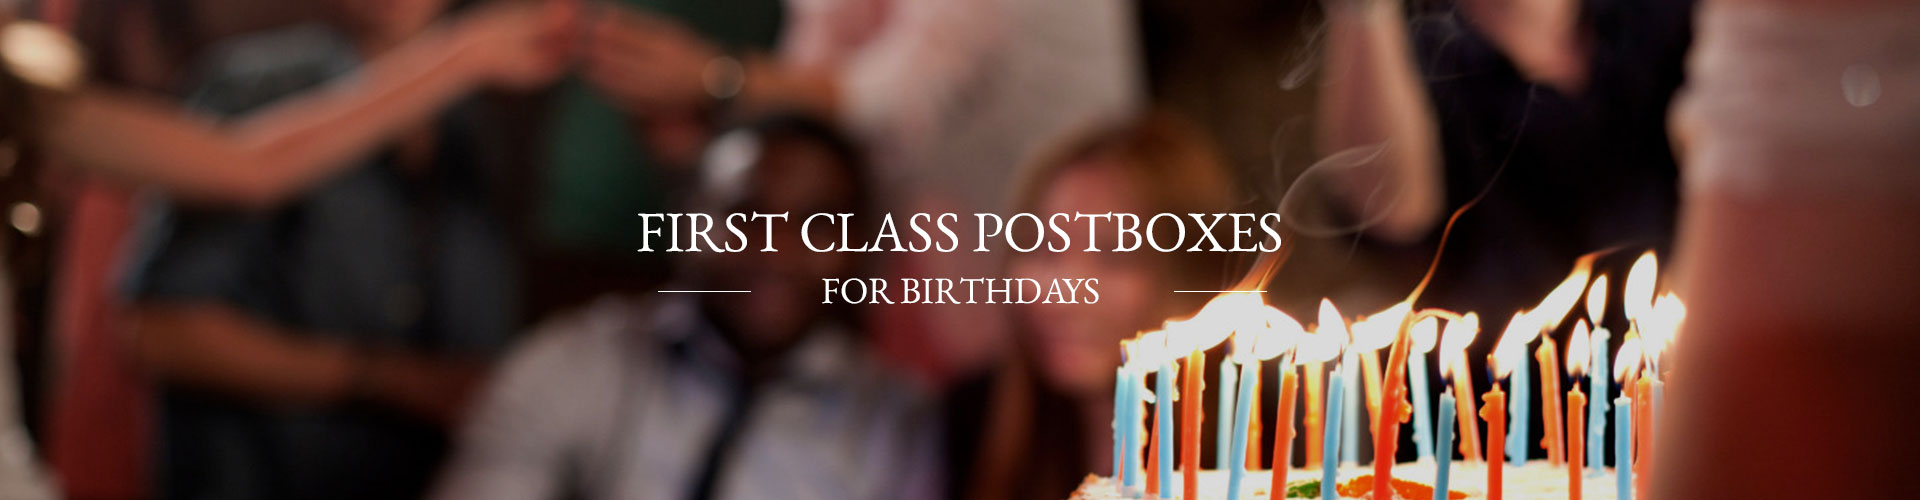 First Class Postboxes for Birthdays